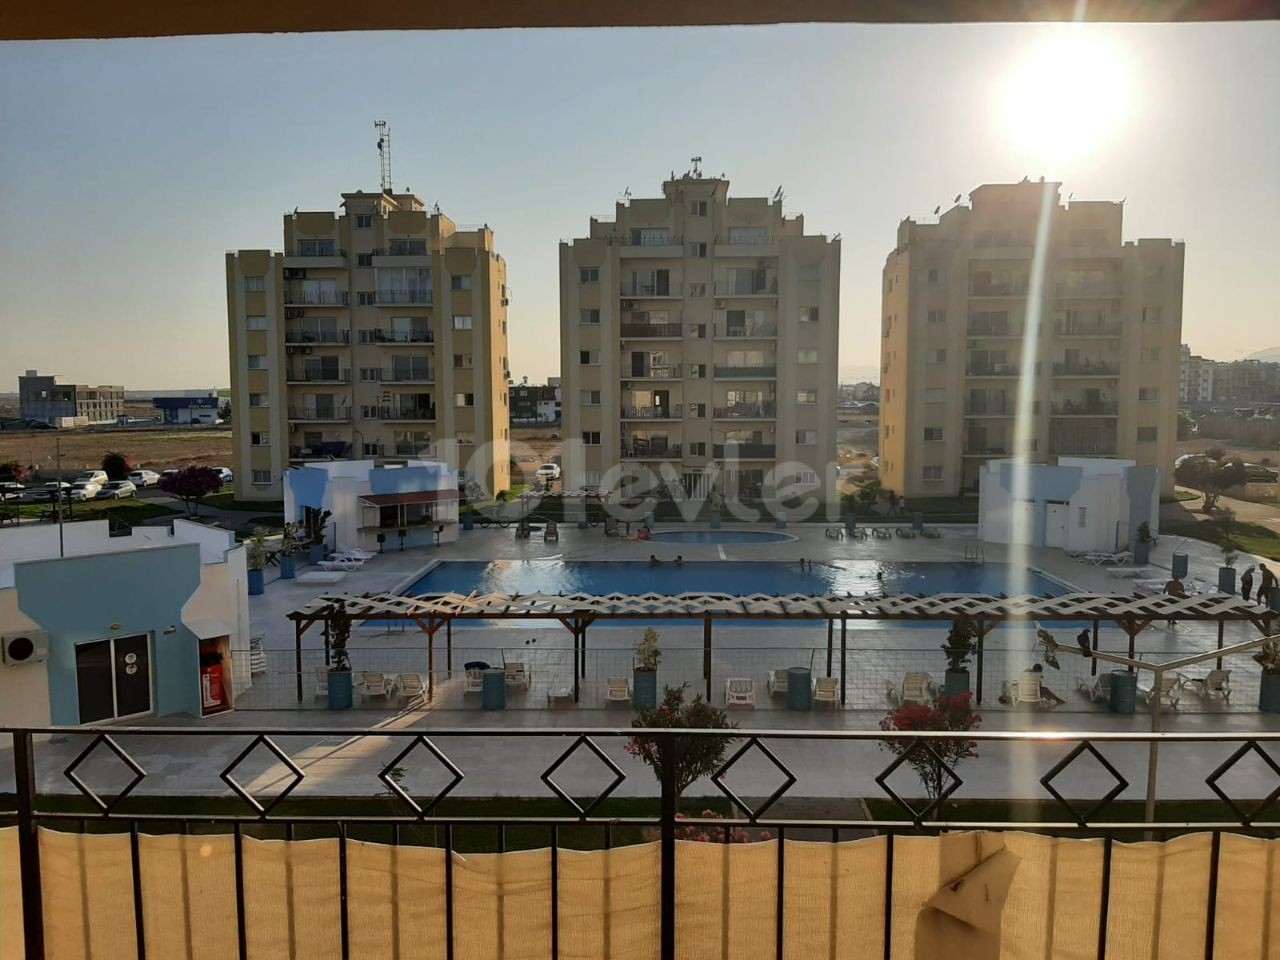 2+1 FLAT FOR RENT IN İSKELE BEGONVILLA, FURNISHED WITH 3 MONTHS PAYMENT